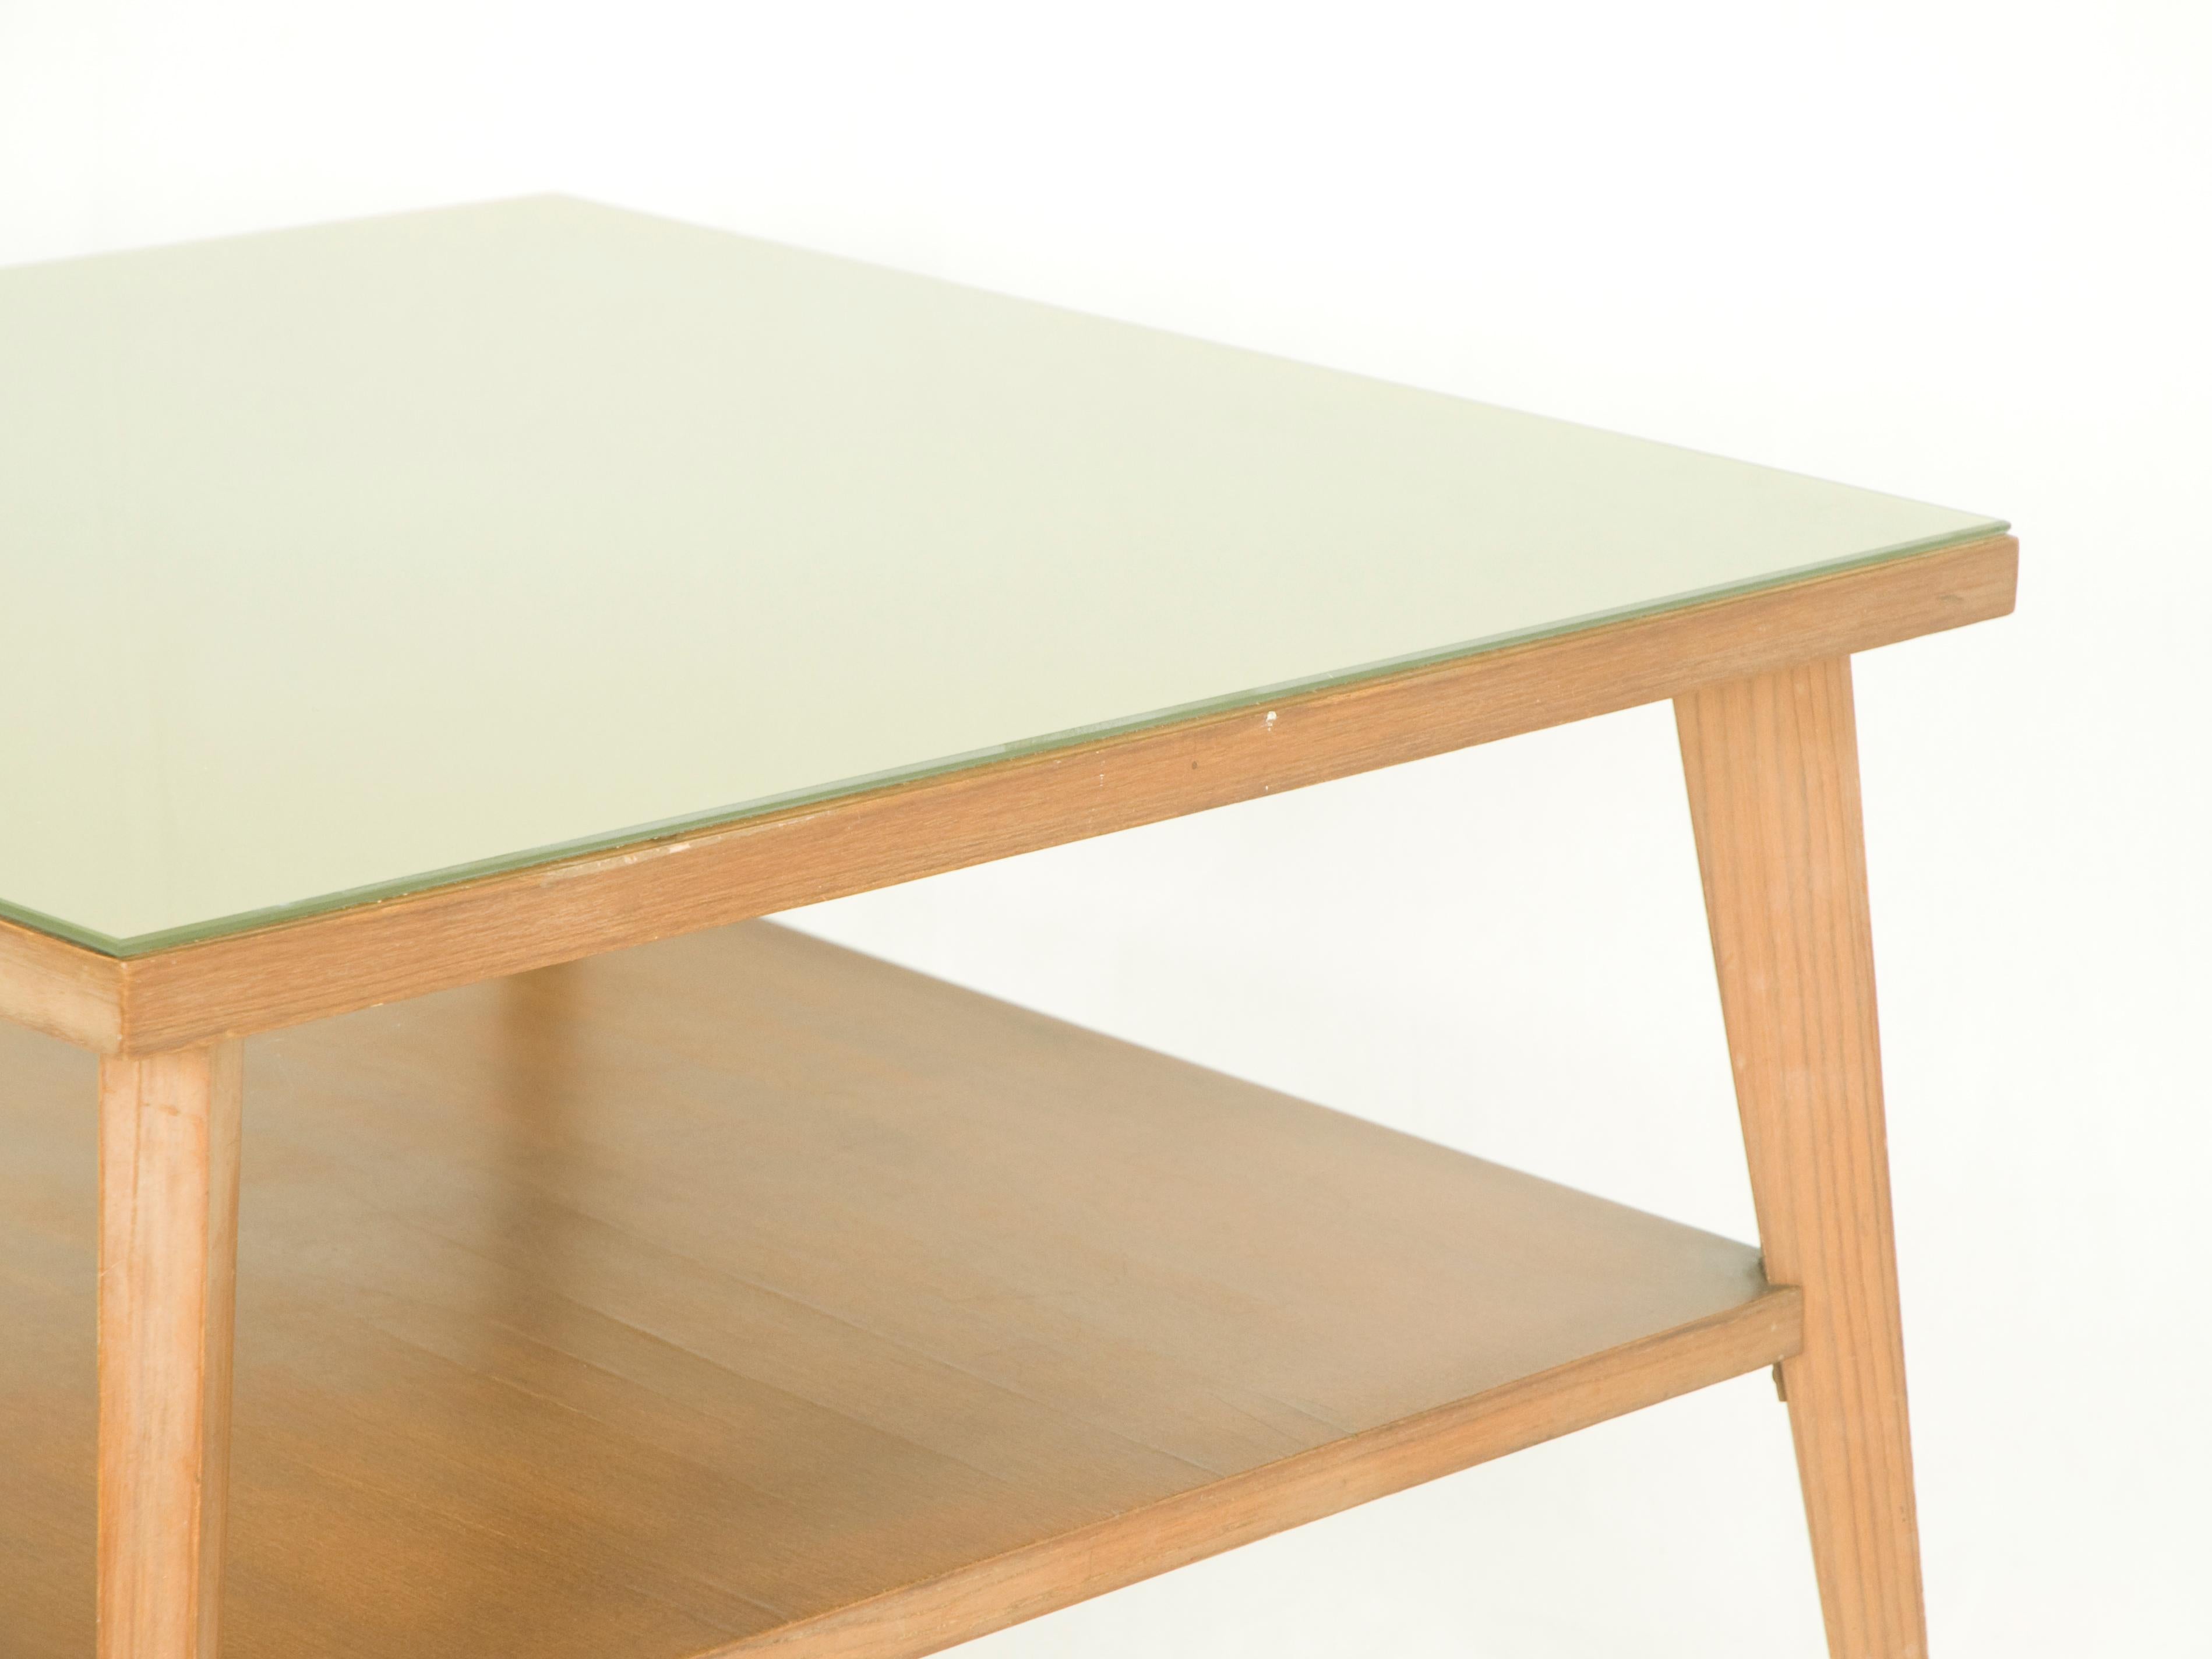 This square coffee table is made from a teak wood structure with a green glass top. It feautures a doble usefull shelves. The glass of the top is clear, but covered with metallic light green layer applied on the back. The glass top remains slightly